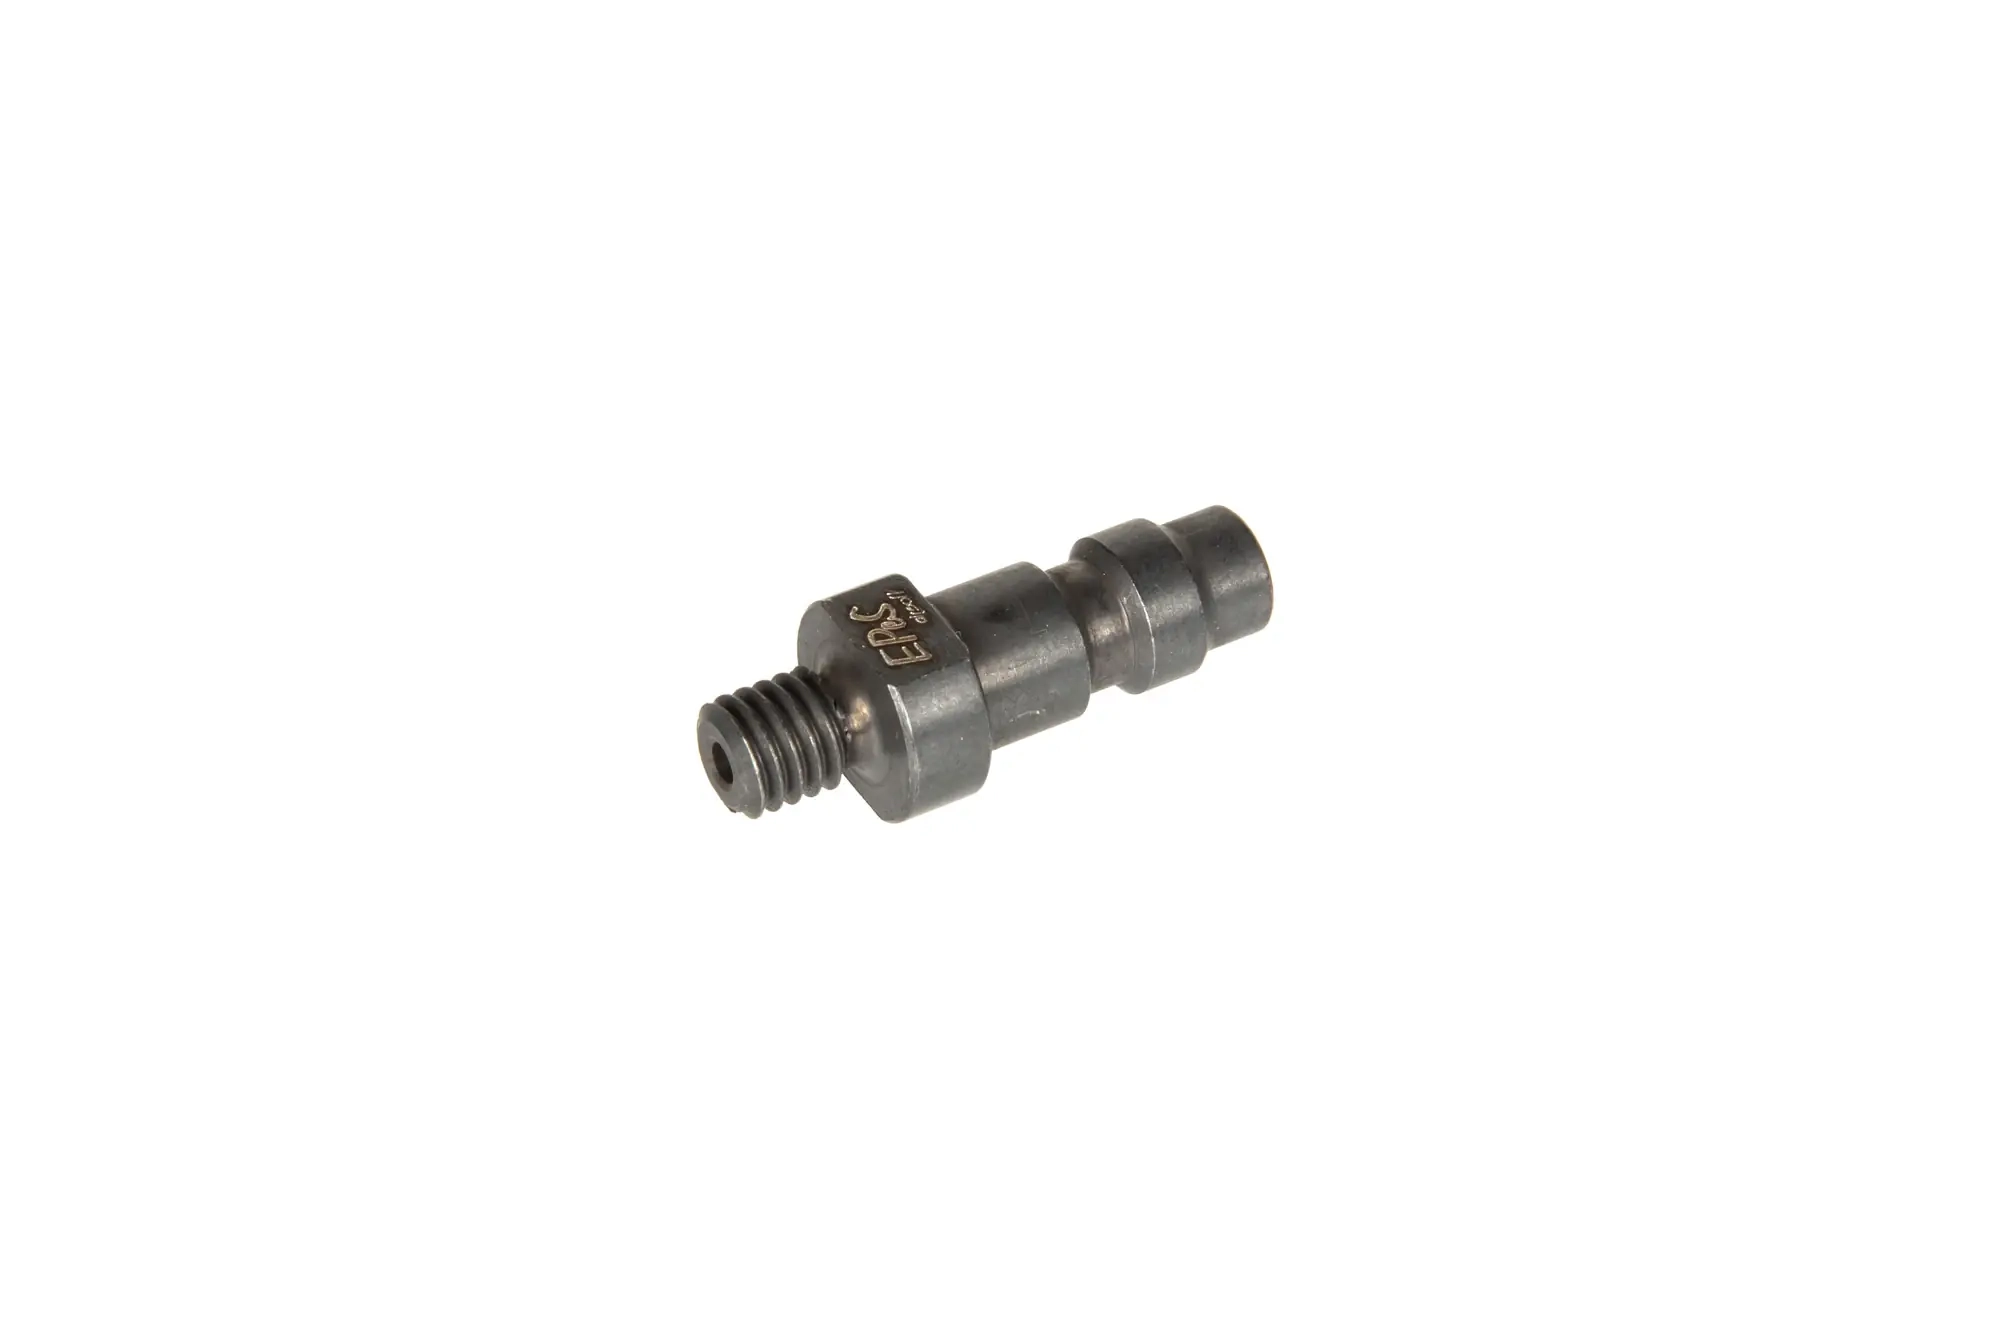 EPeS Airsoft HPA adaptor - type M6/DE